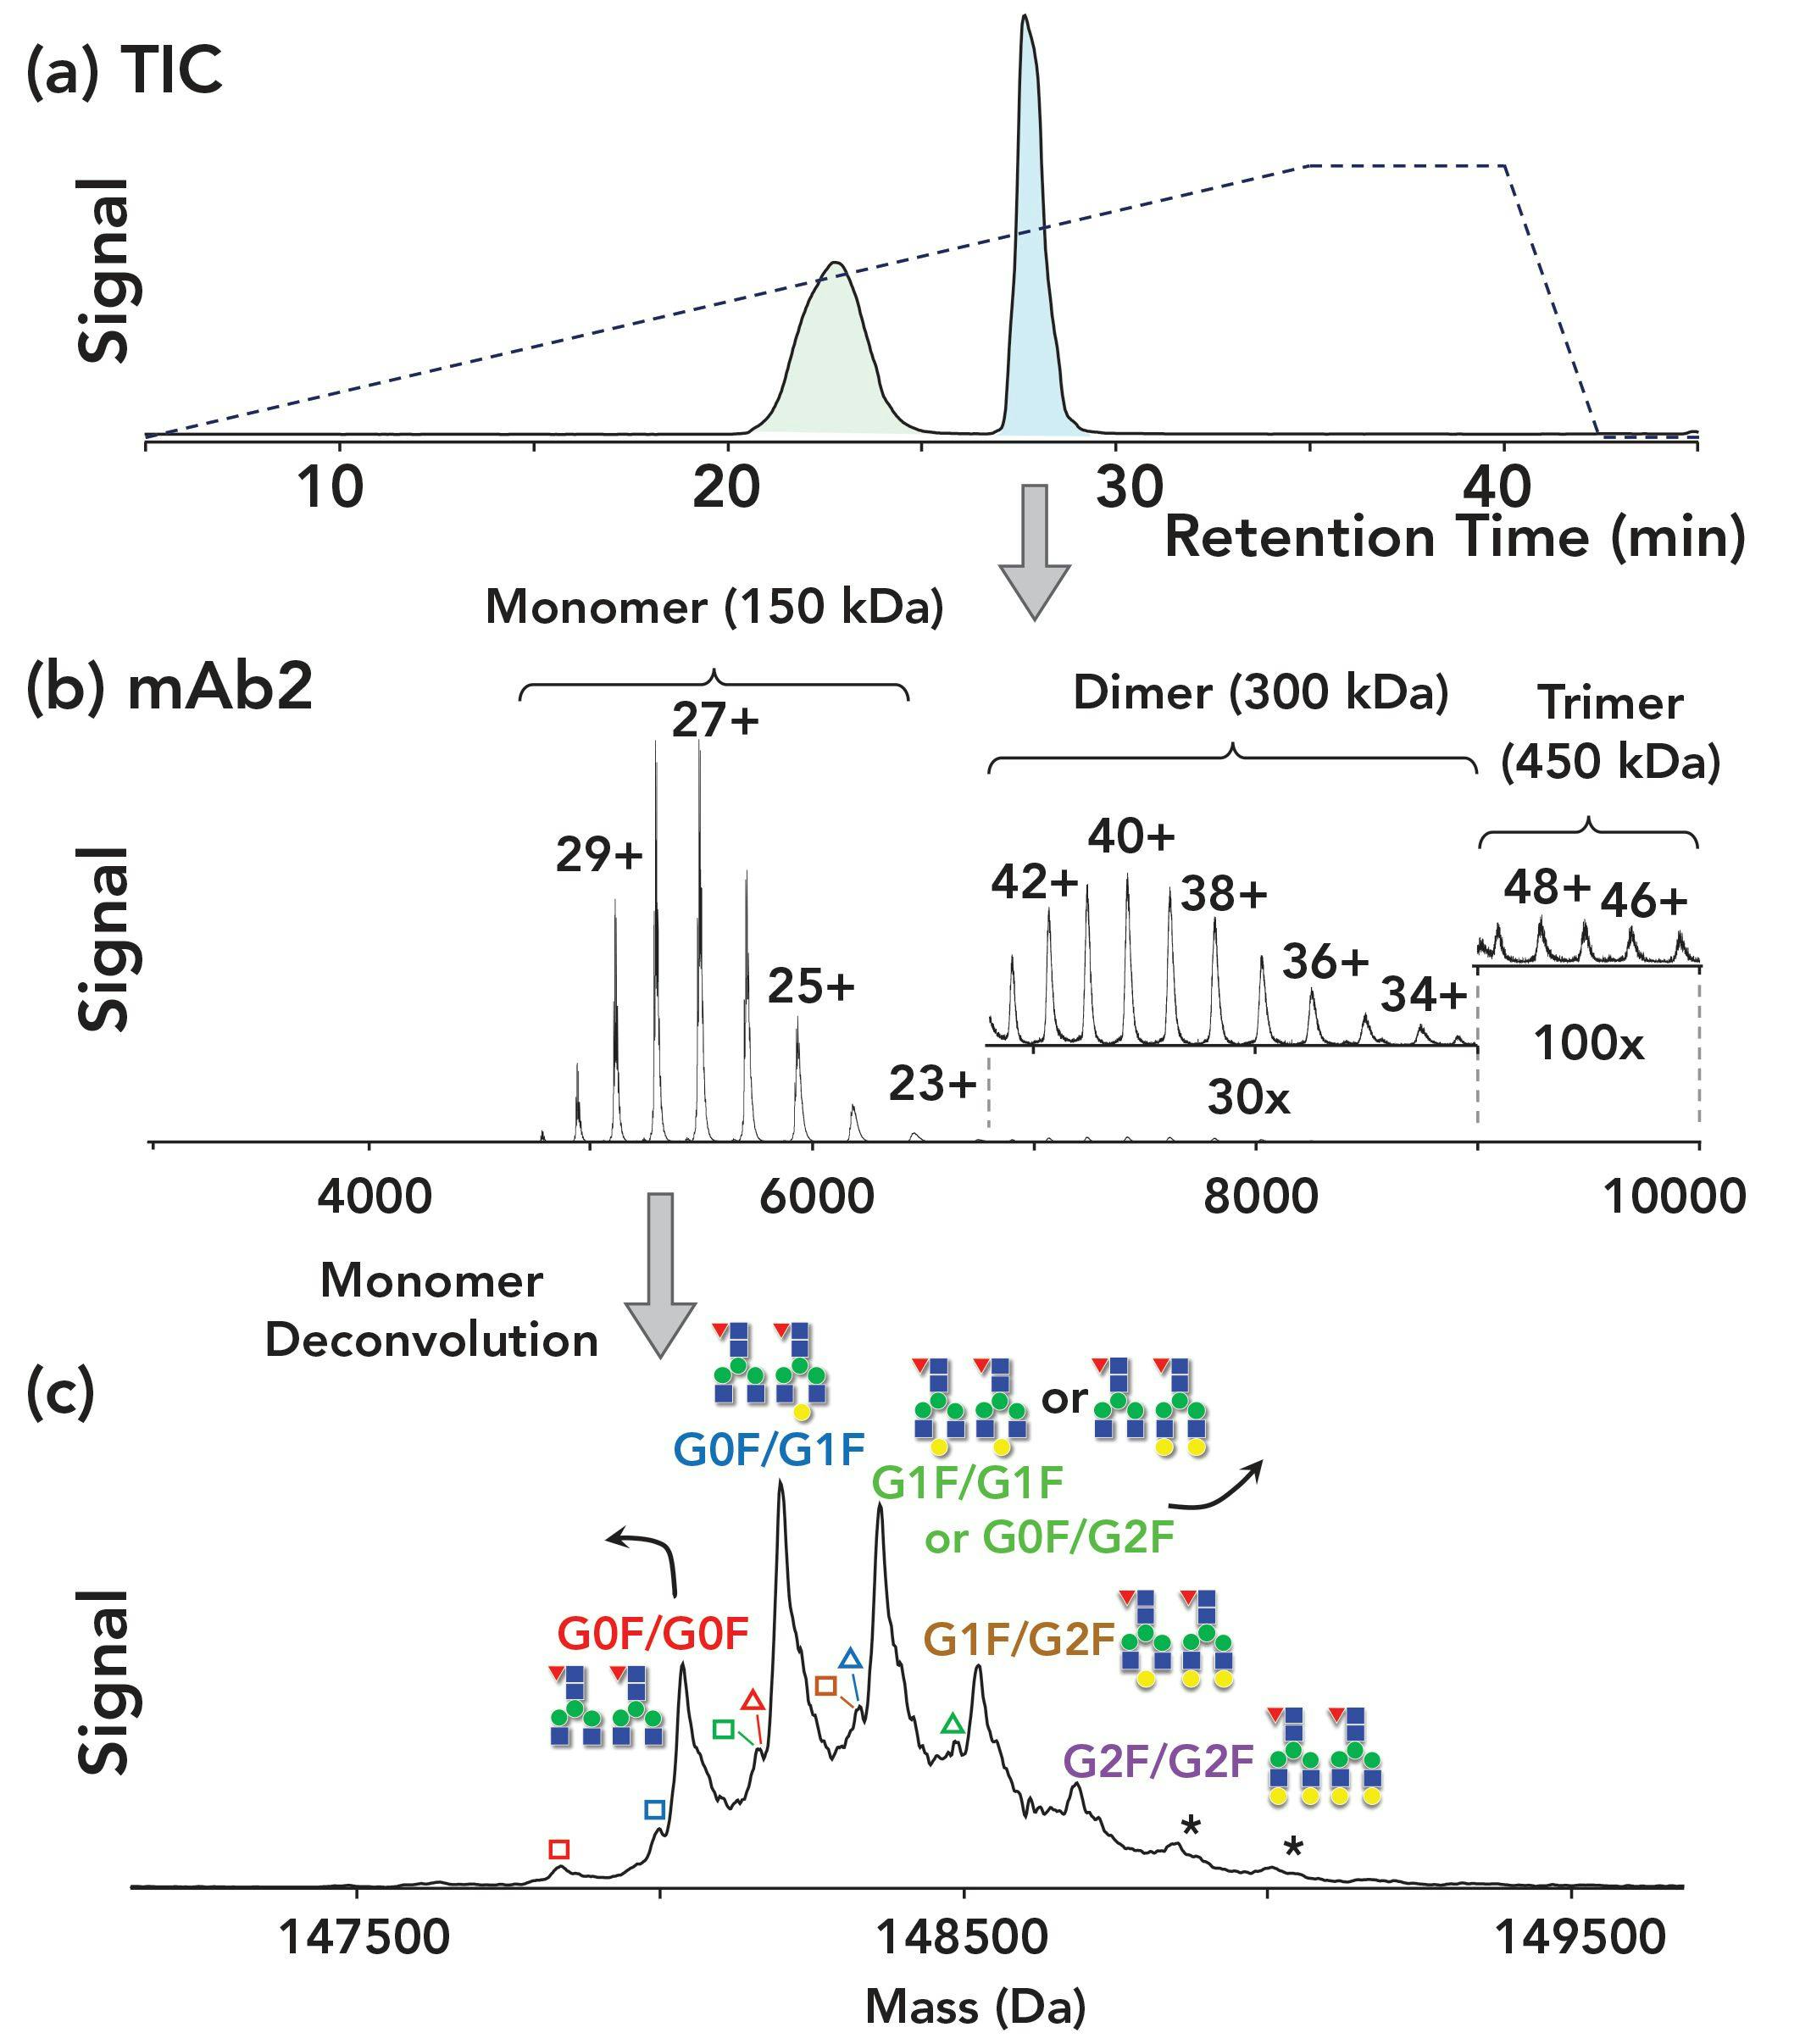 FIGURE 3: Analysis of two mAbs on a PolyPENTYL A capillary. The mAb eluting at 28 min (mAb2) is the NIST standard antibody. Its dimer and trimer are readily evident in the mass spectrum, and with deconvolution, the glycosylation variants are evident as well. The distribution of these variants matches that reported in the scientific literature. a) Total ion chromatogram. b) The mass spectrum of mAb2; the inserts show zoom-ins for the dimer and trimer. c) The deconvoluted mass spectrum of mAb2 monomer, annotated to identify the glycosylation variants. Figure adapted from reference (6).